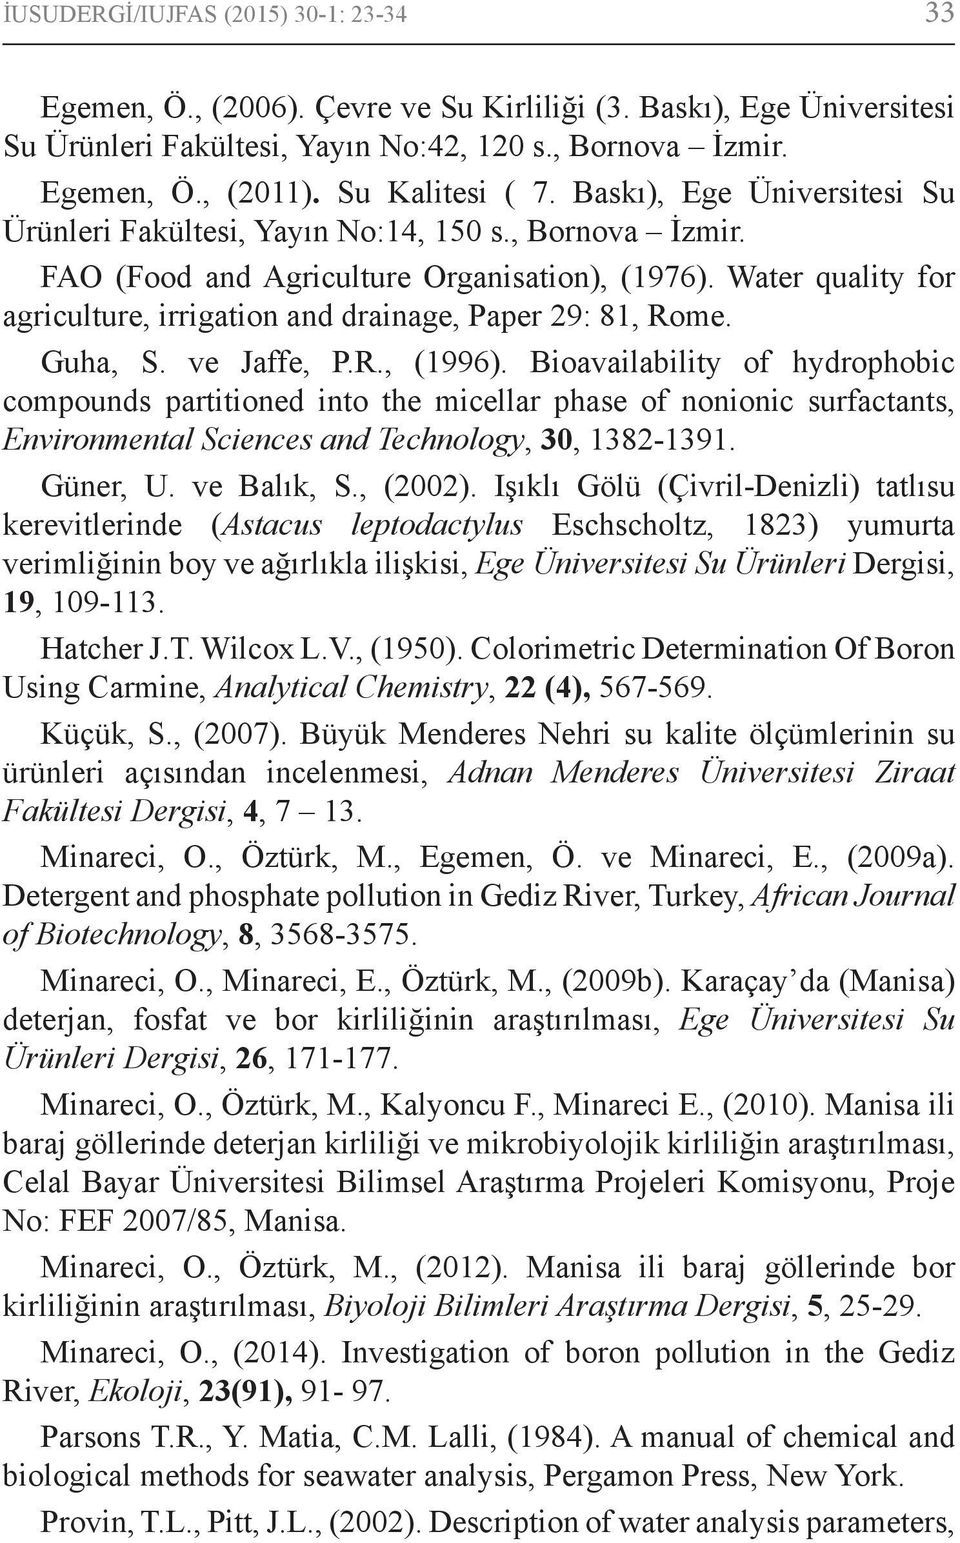 Water quality for agriculture, irrigation and drainage, Paper 29: 81, Rome. Guha, S. ve Jaffe, P.R., (1996).